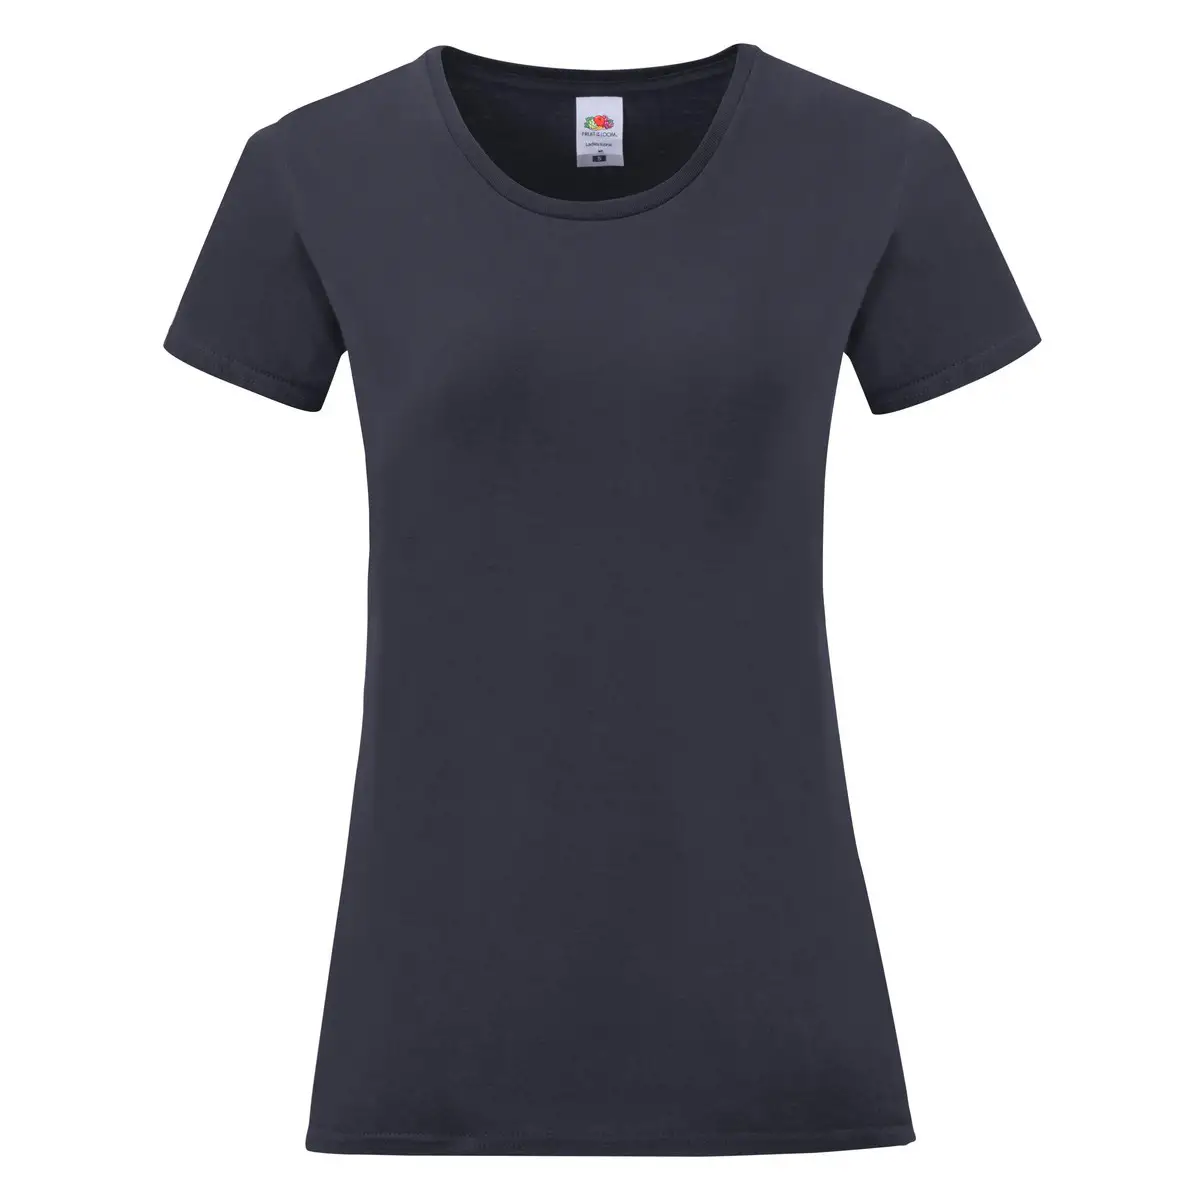 T-Shirt Donna Cotone Soffice Personalizzata - Fruit of the Loom